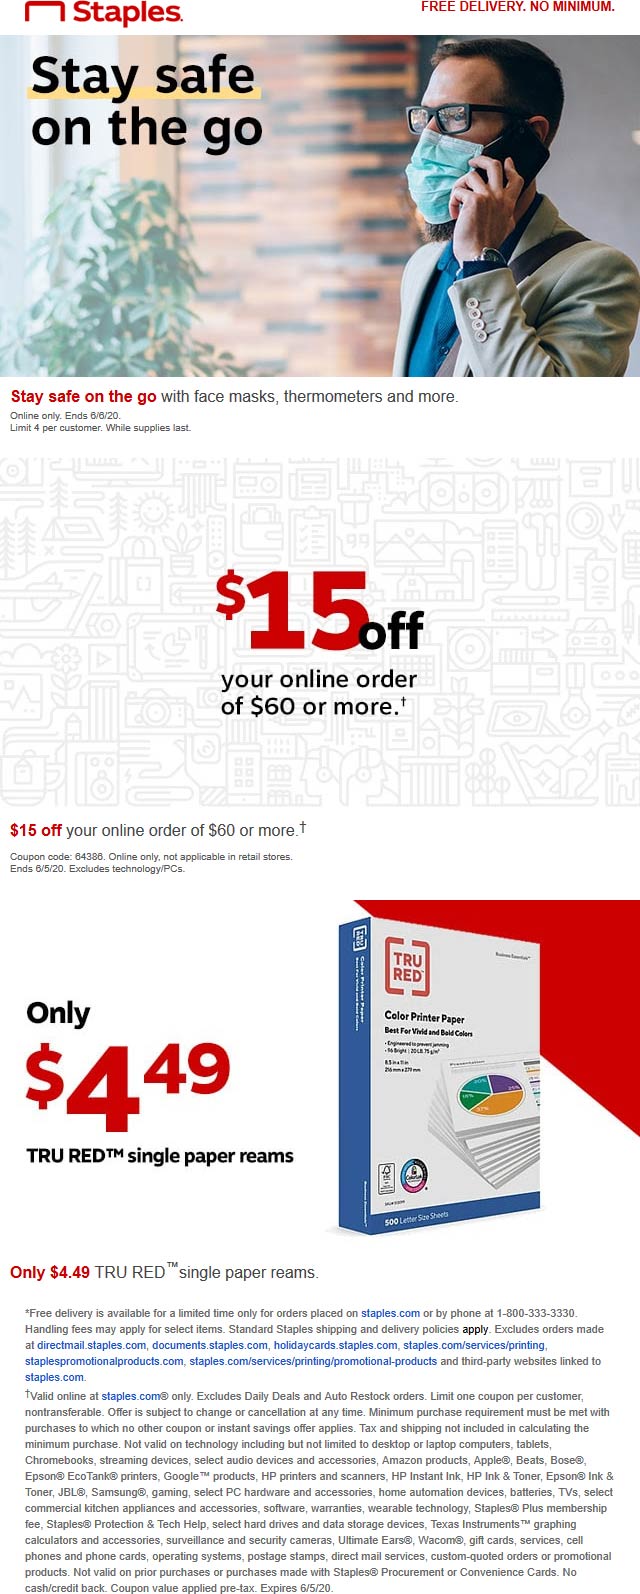 Staples stores Coupon  $15 off $60 online at Staples via promo code 64386 - free delivery no minimum #staples